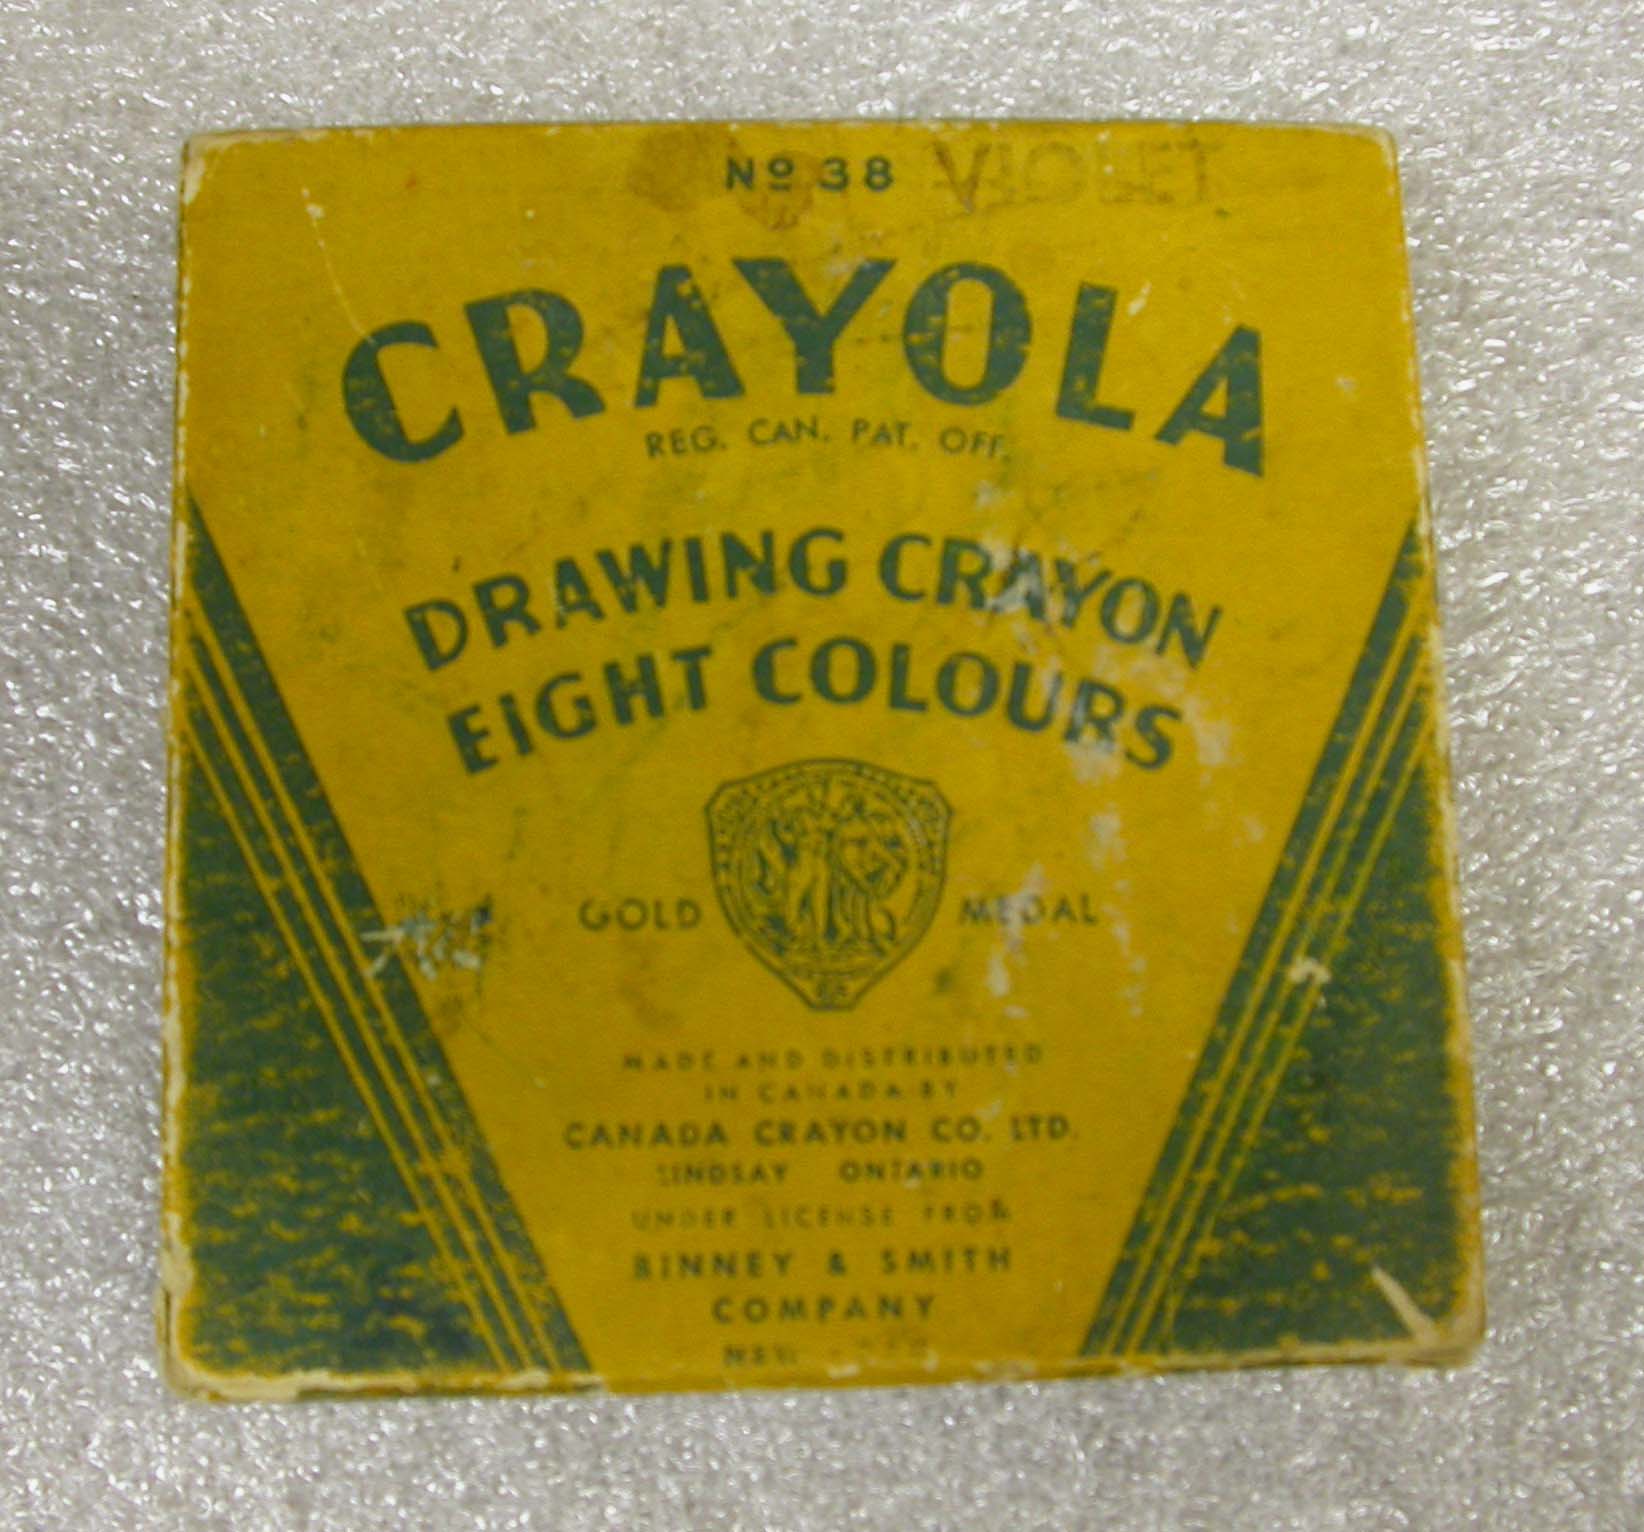 a%20box%20of%20Crayola%20Crayons%20from%20the%201950%27s